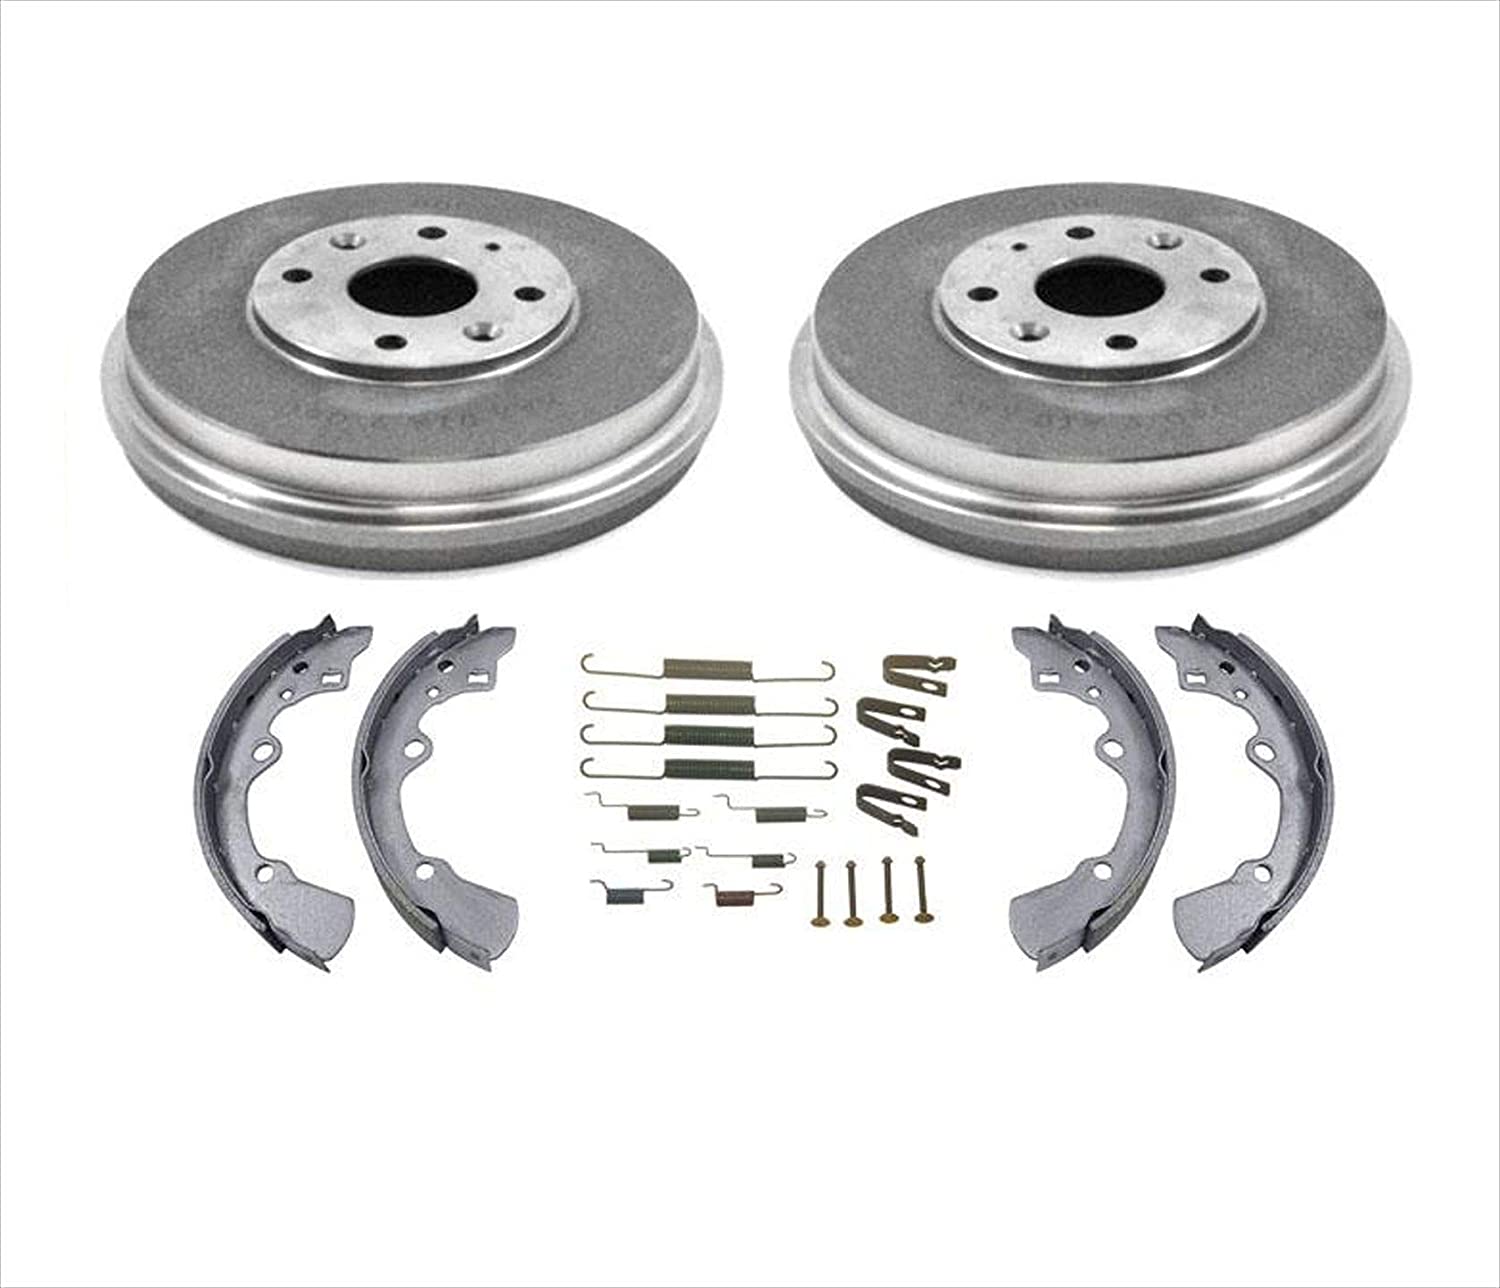 3500/7000 Lb Trailer Axle Brake Shoes Replacement